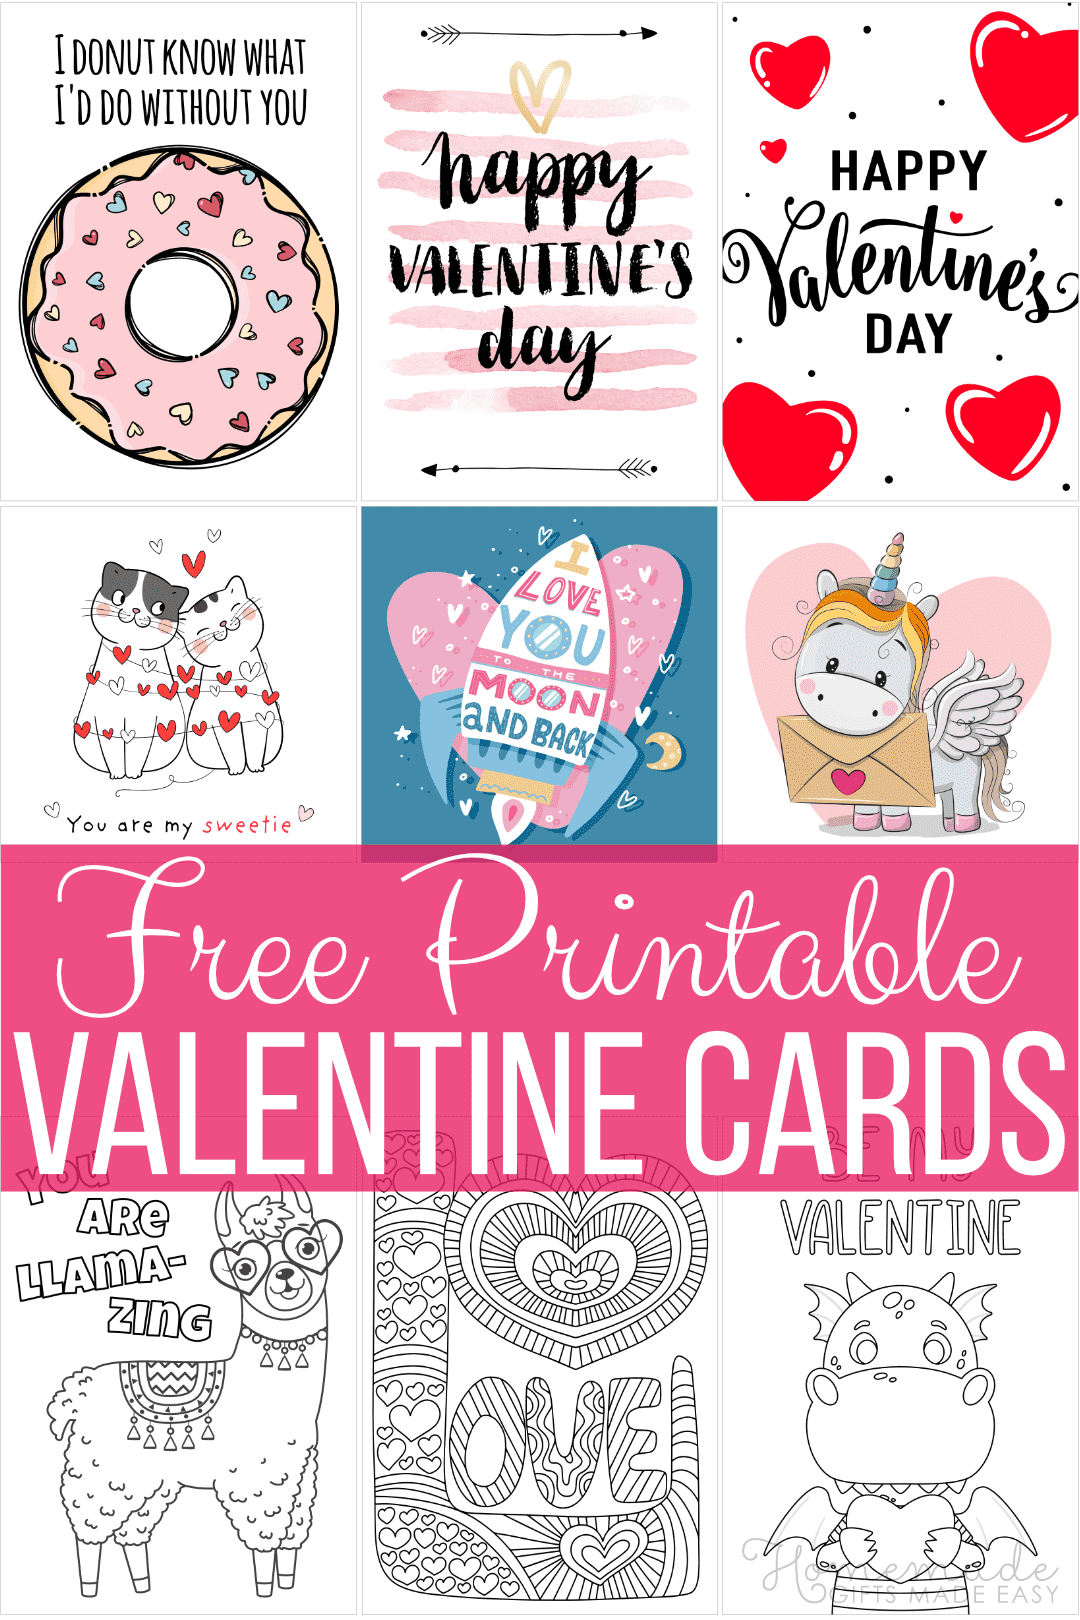 100+ Valentine Card Sayings - What to Write in a Valentine's Card